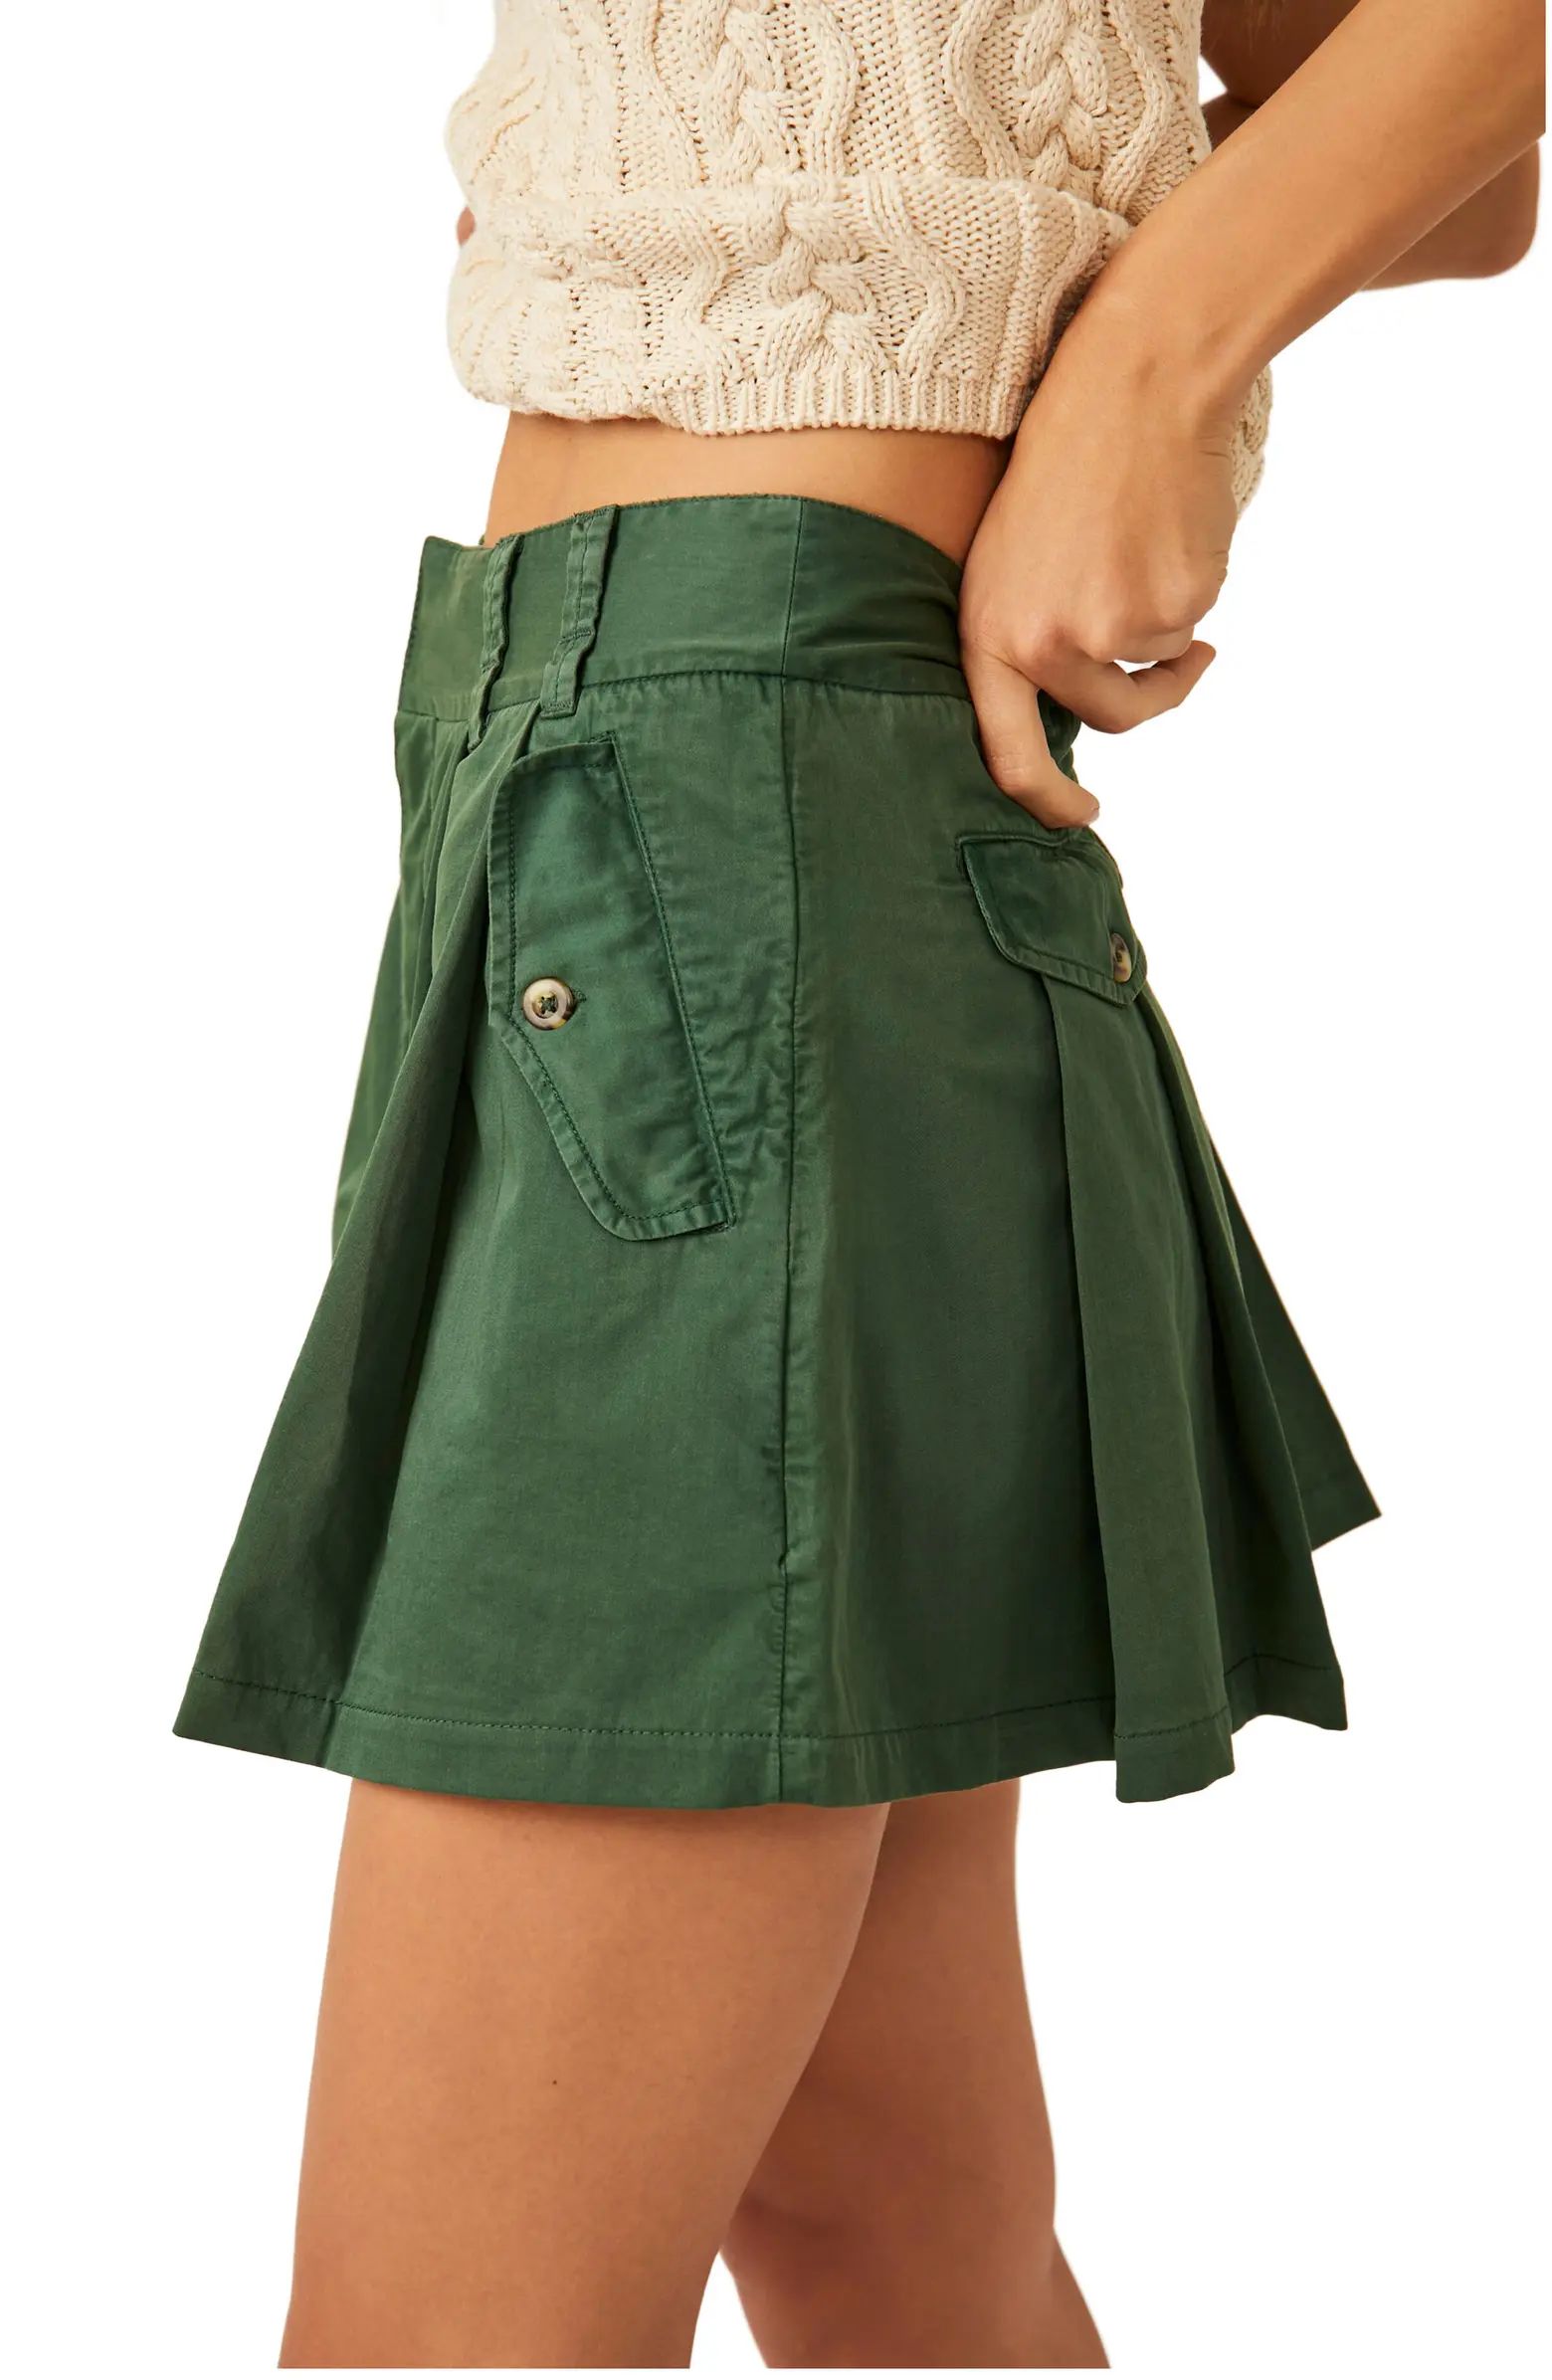 Free People Pleats To Meet You Cotton Miniskirt | Nordstrom | Nordstrom